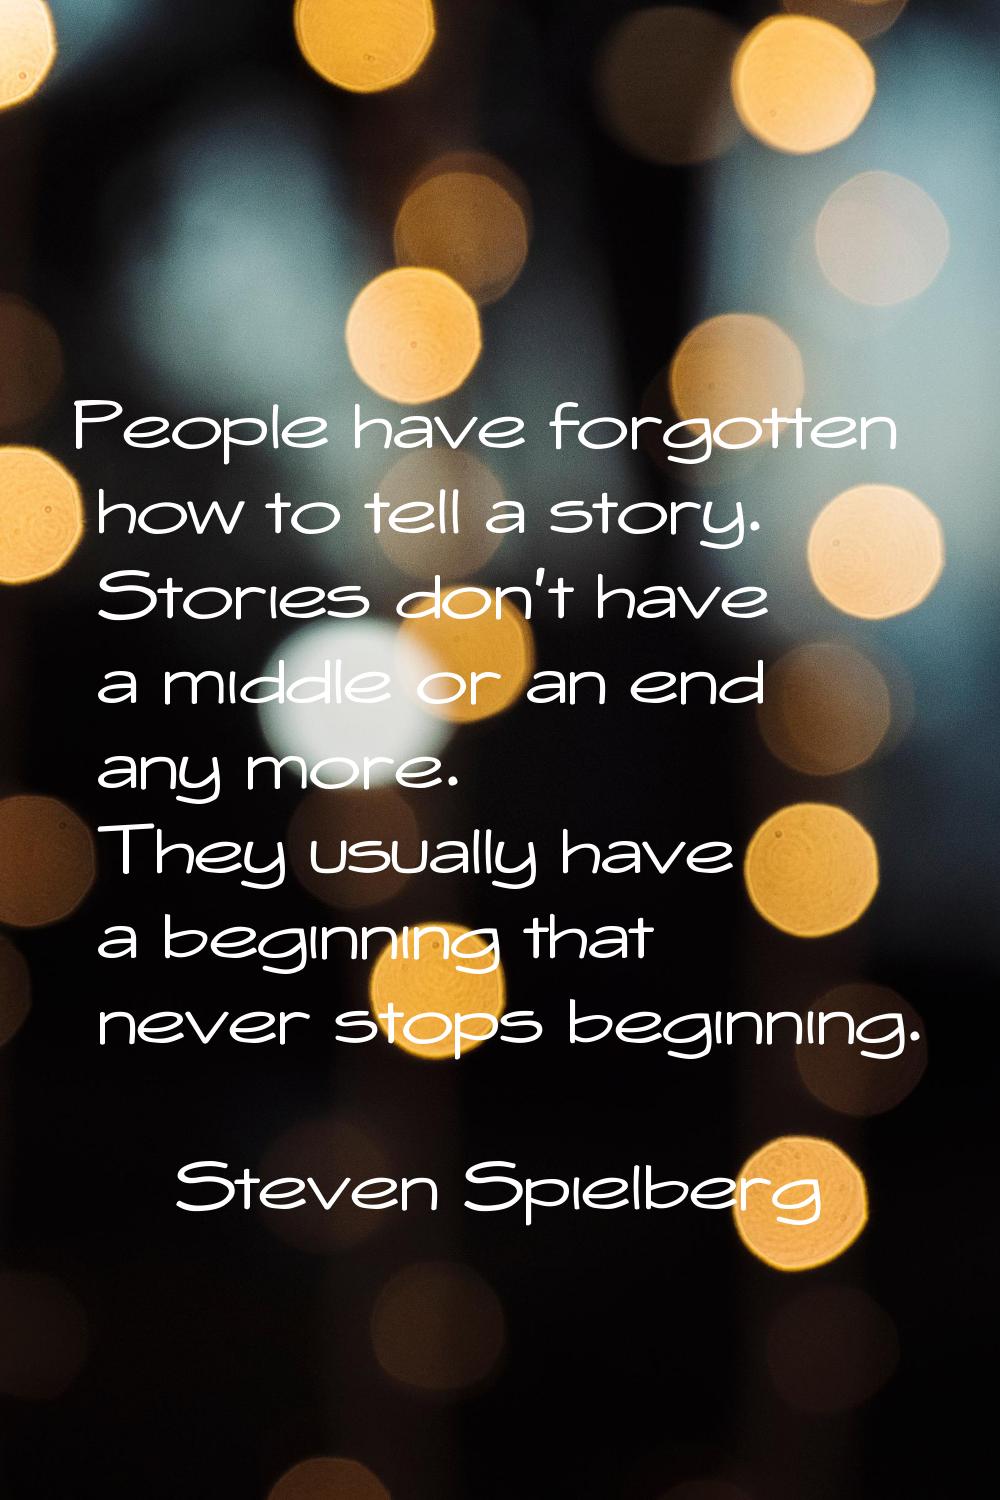 People have forgotten how to tell a story. Stories don't have a middle or an end any more. They usu